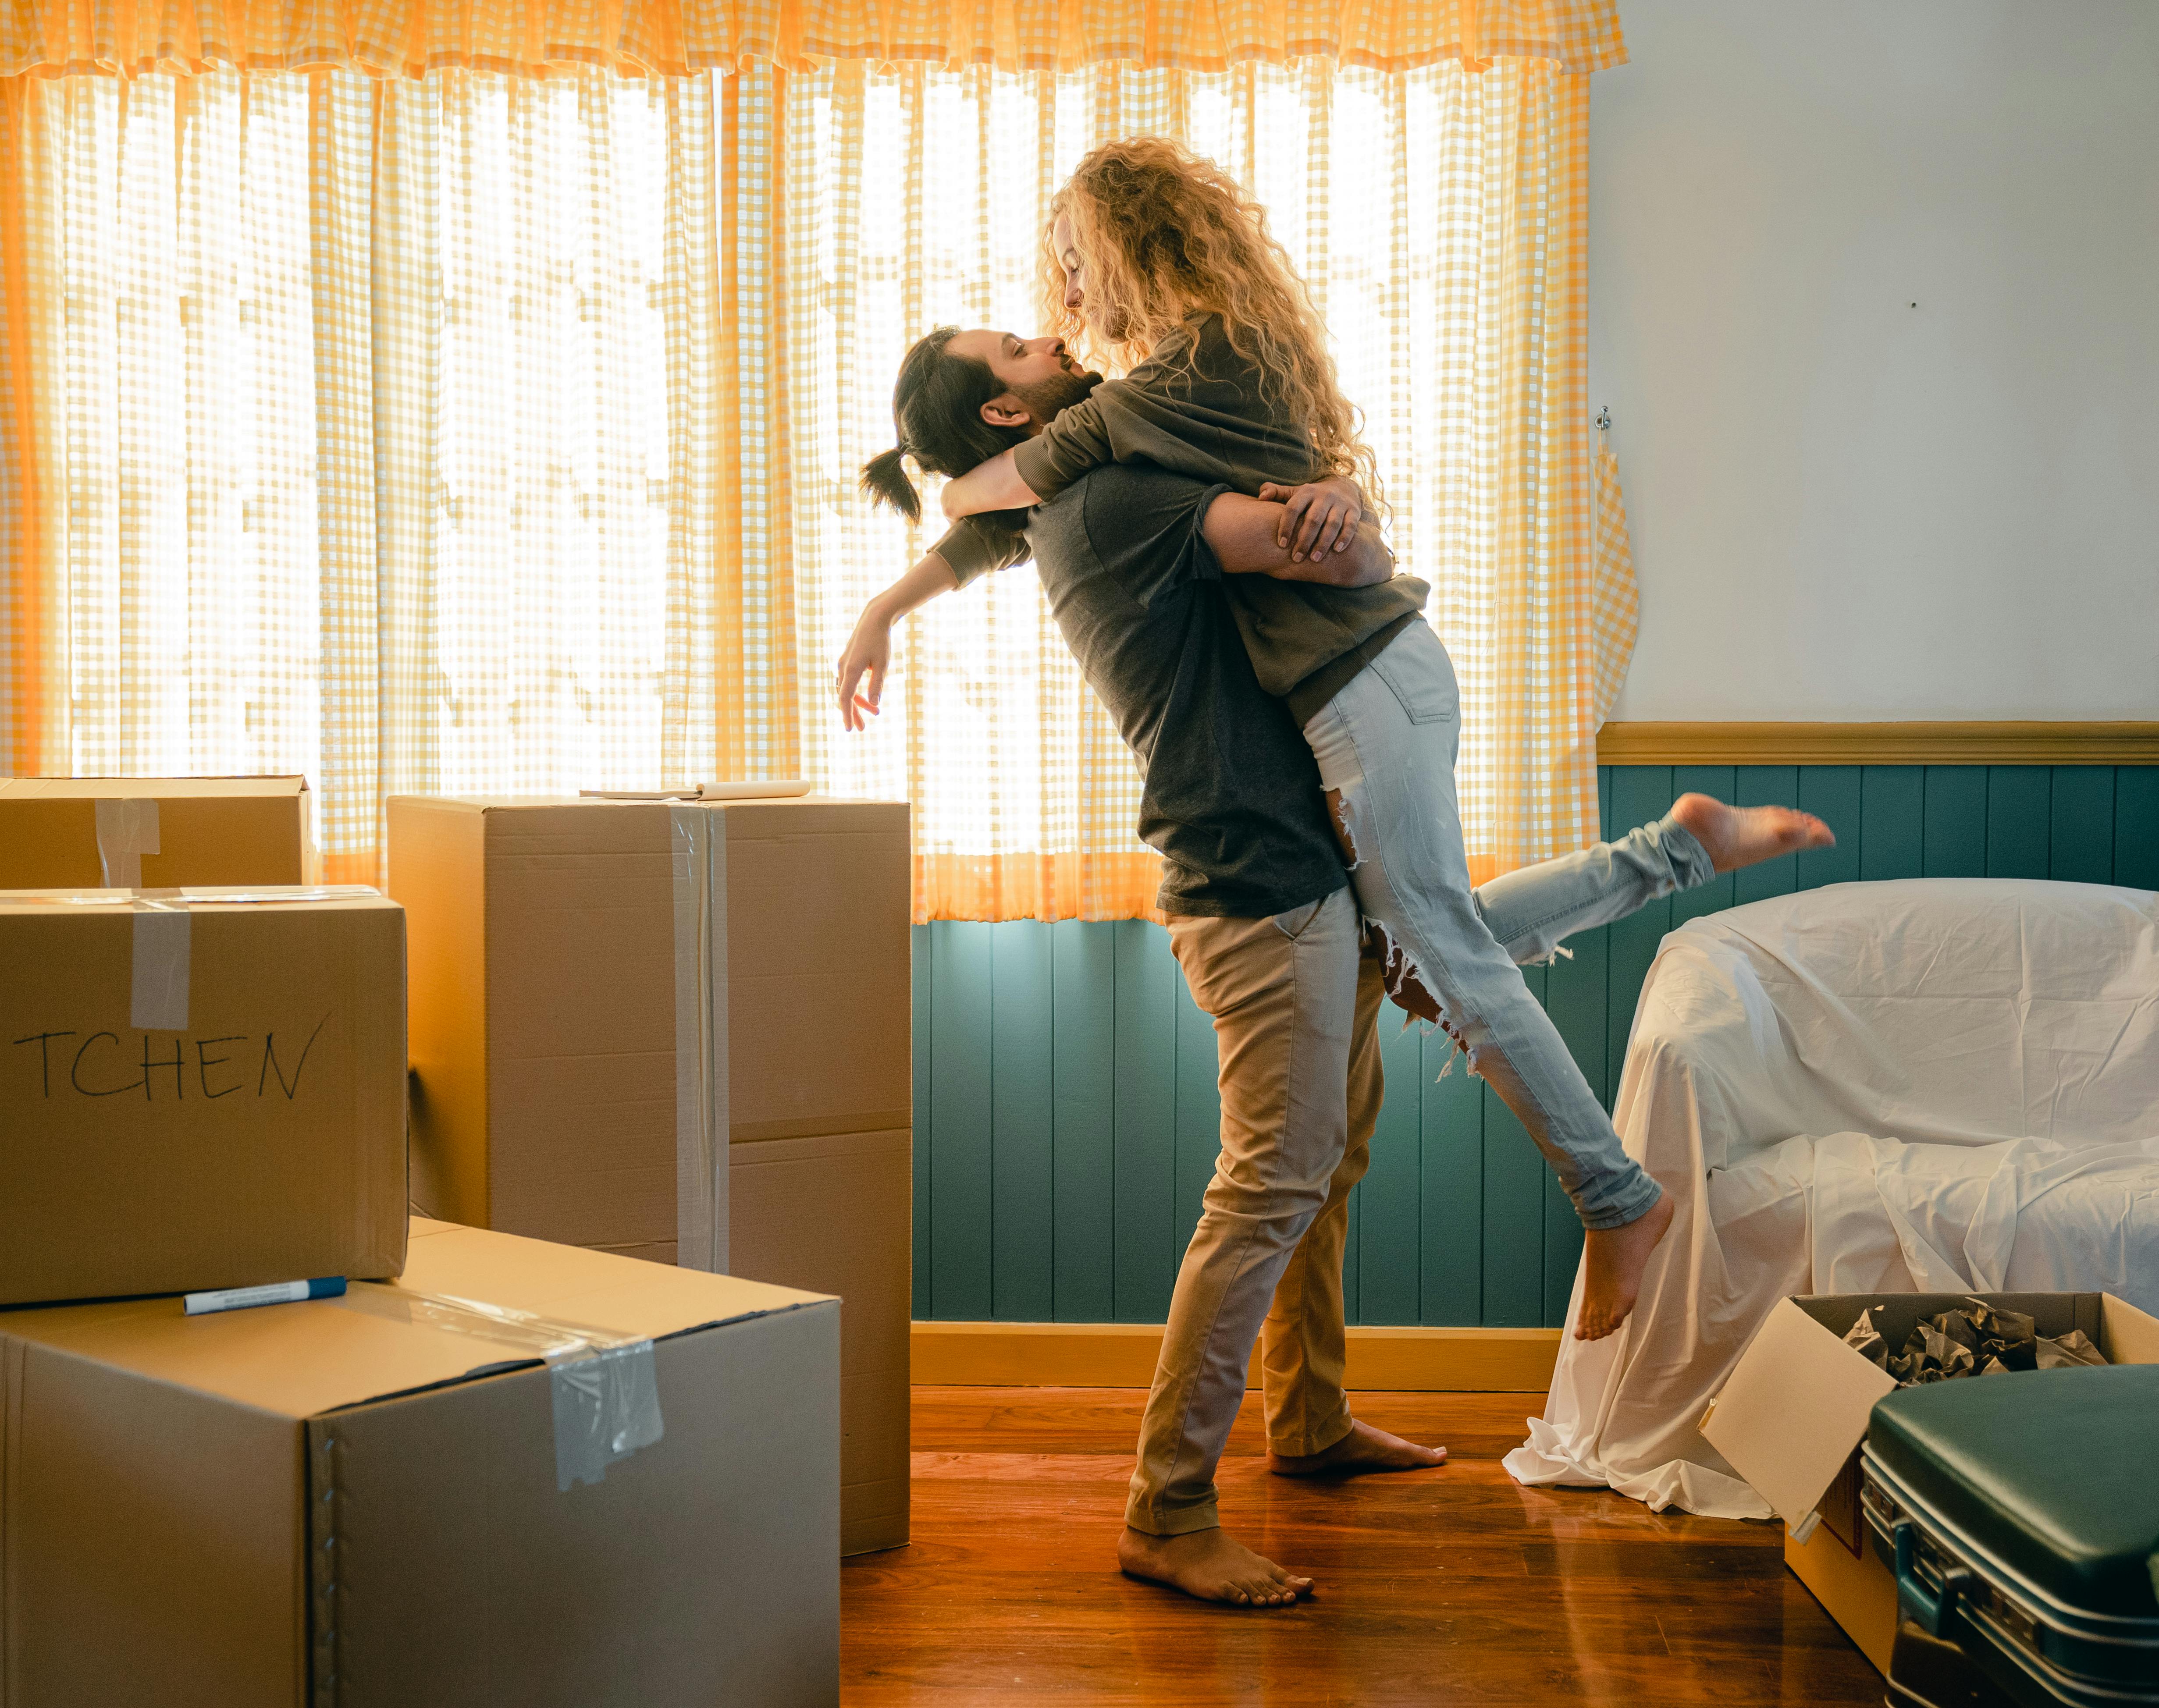 Couple moves into their new home | Source: Pexels